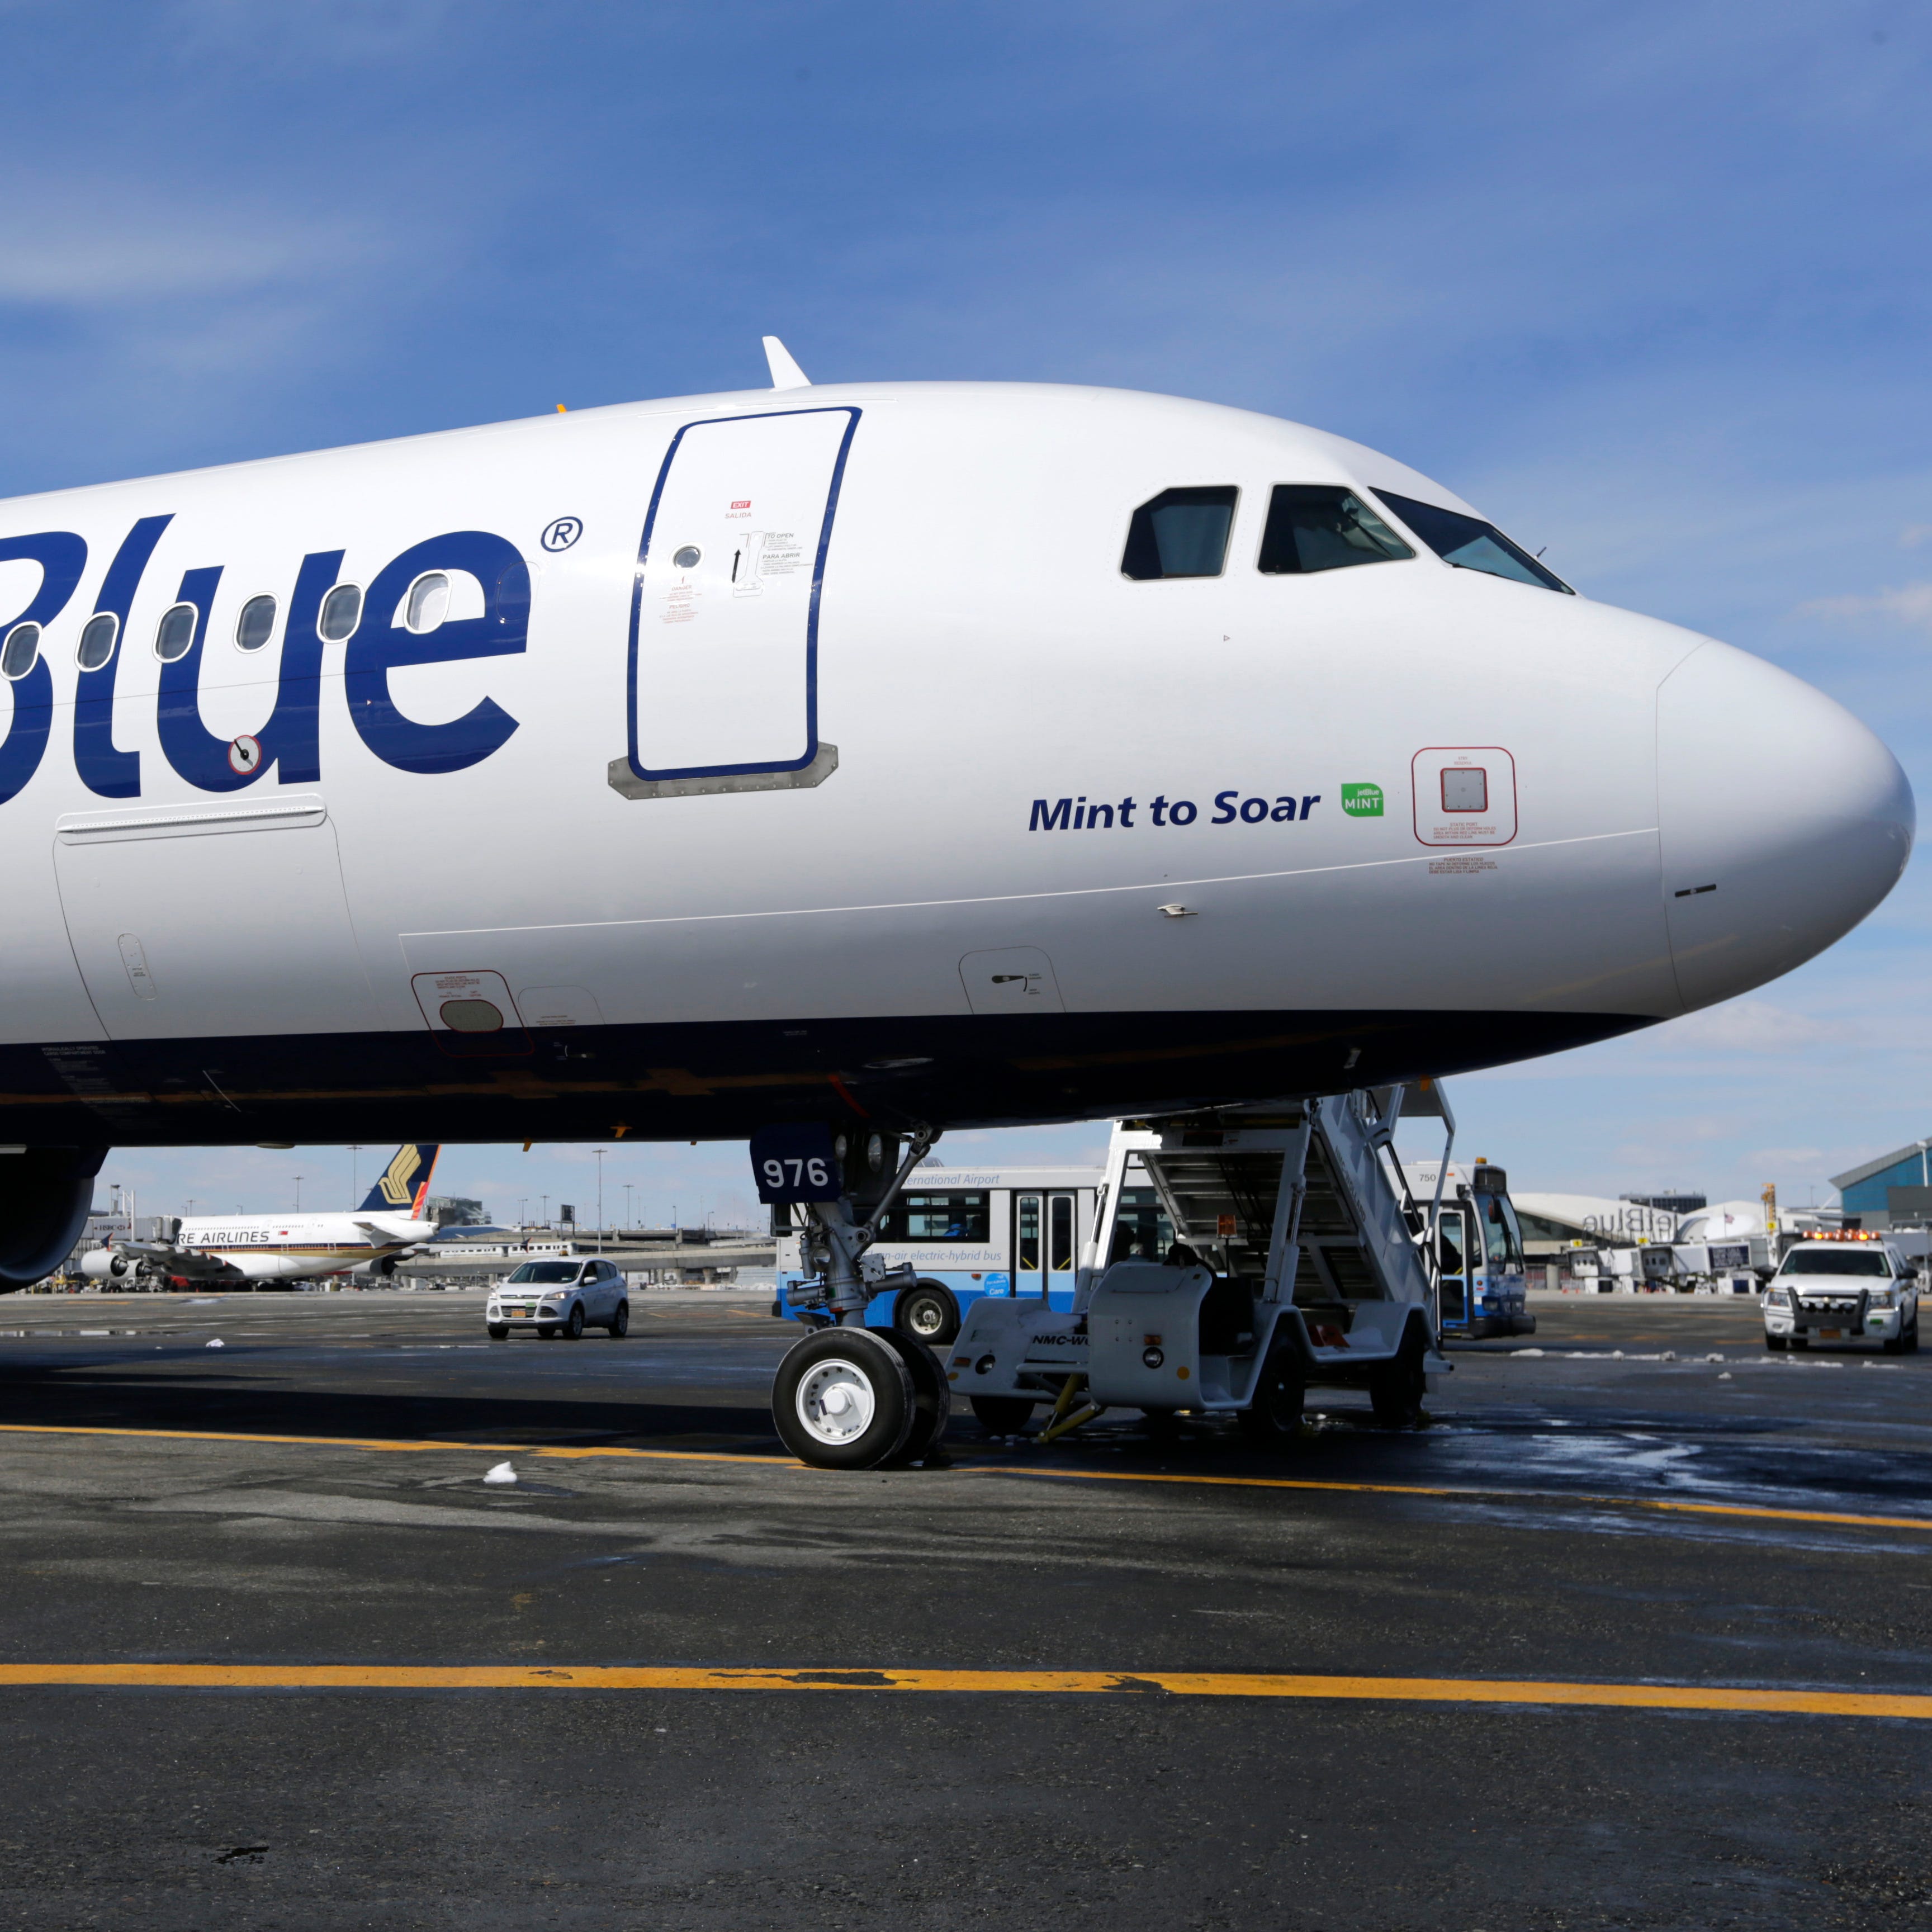 A JetBlue airplane is shown at John F. Kennedy International Airport in New York, March 16, 2017. (AP Photo/Seth Wenig, File)